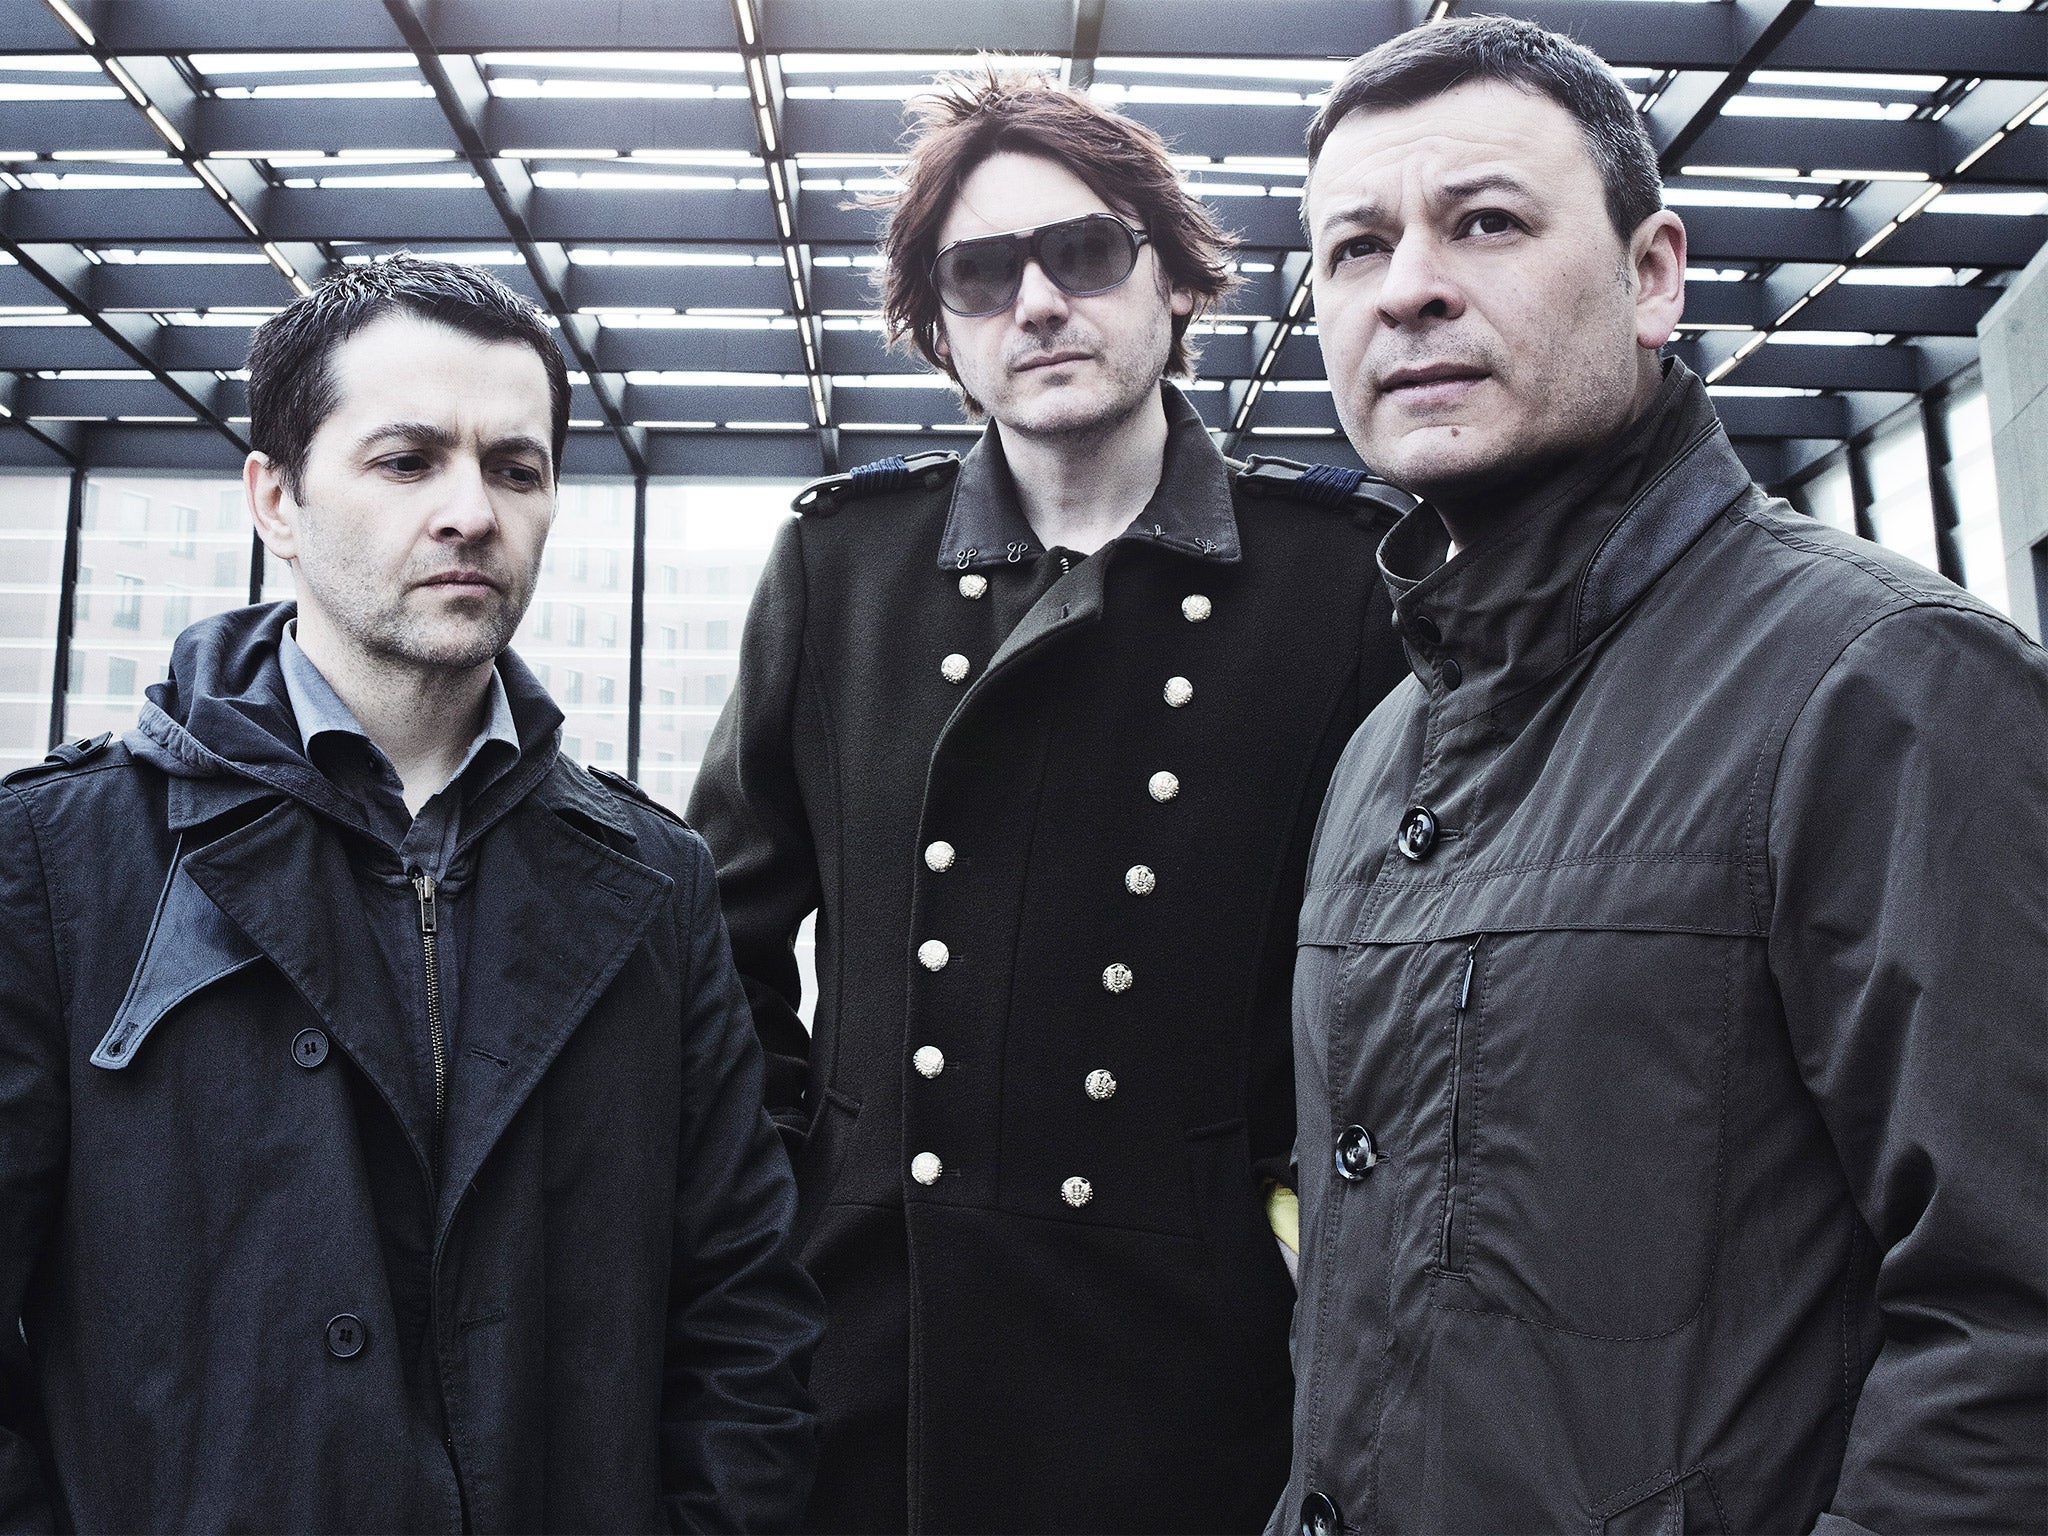 The Manic Street Preachers hope their patriotic song will inspire the Welsh team to Euro 2016 glory